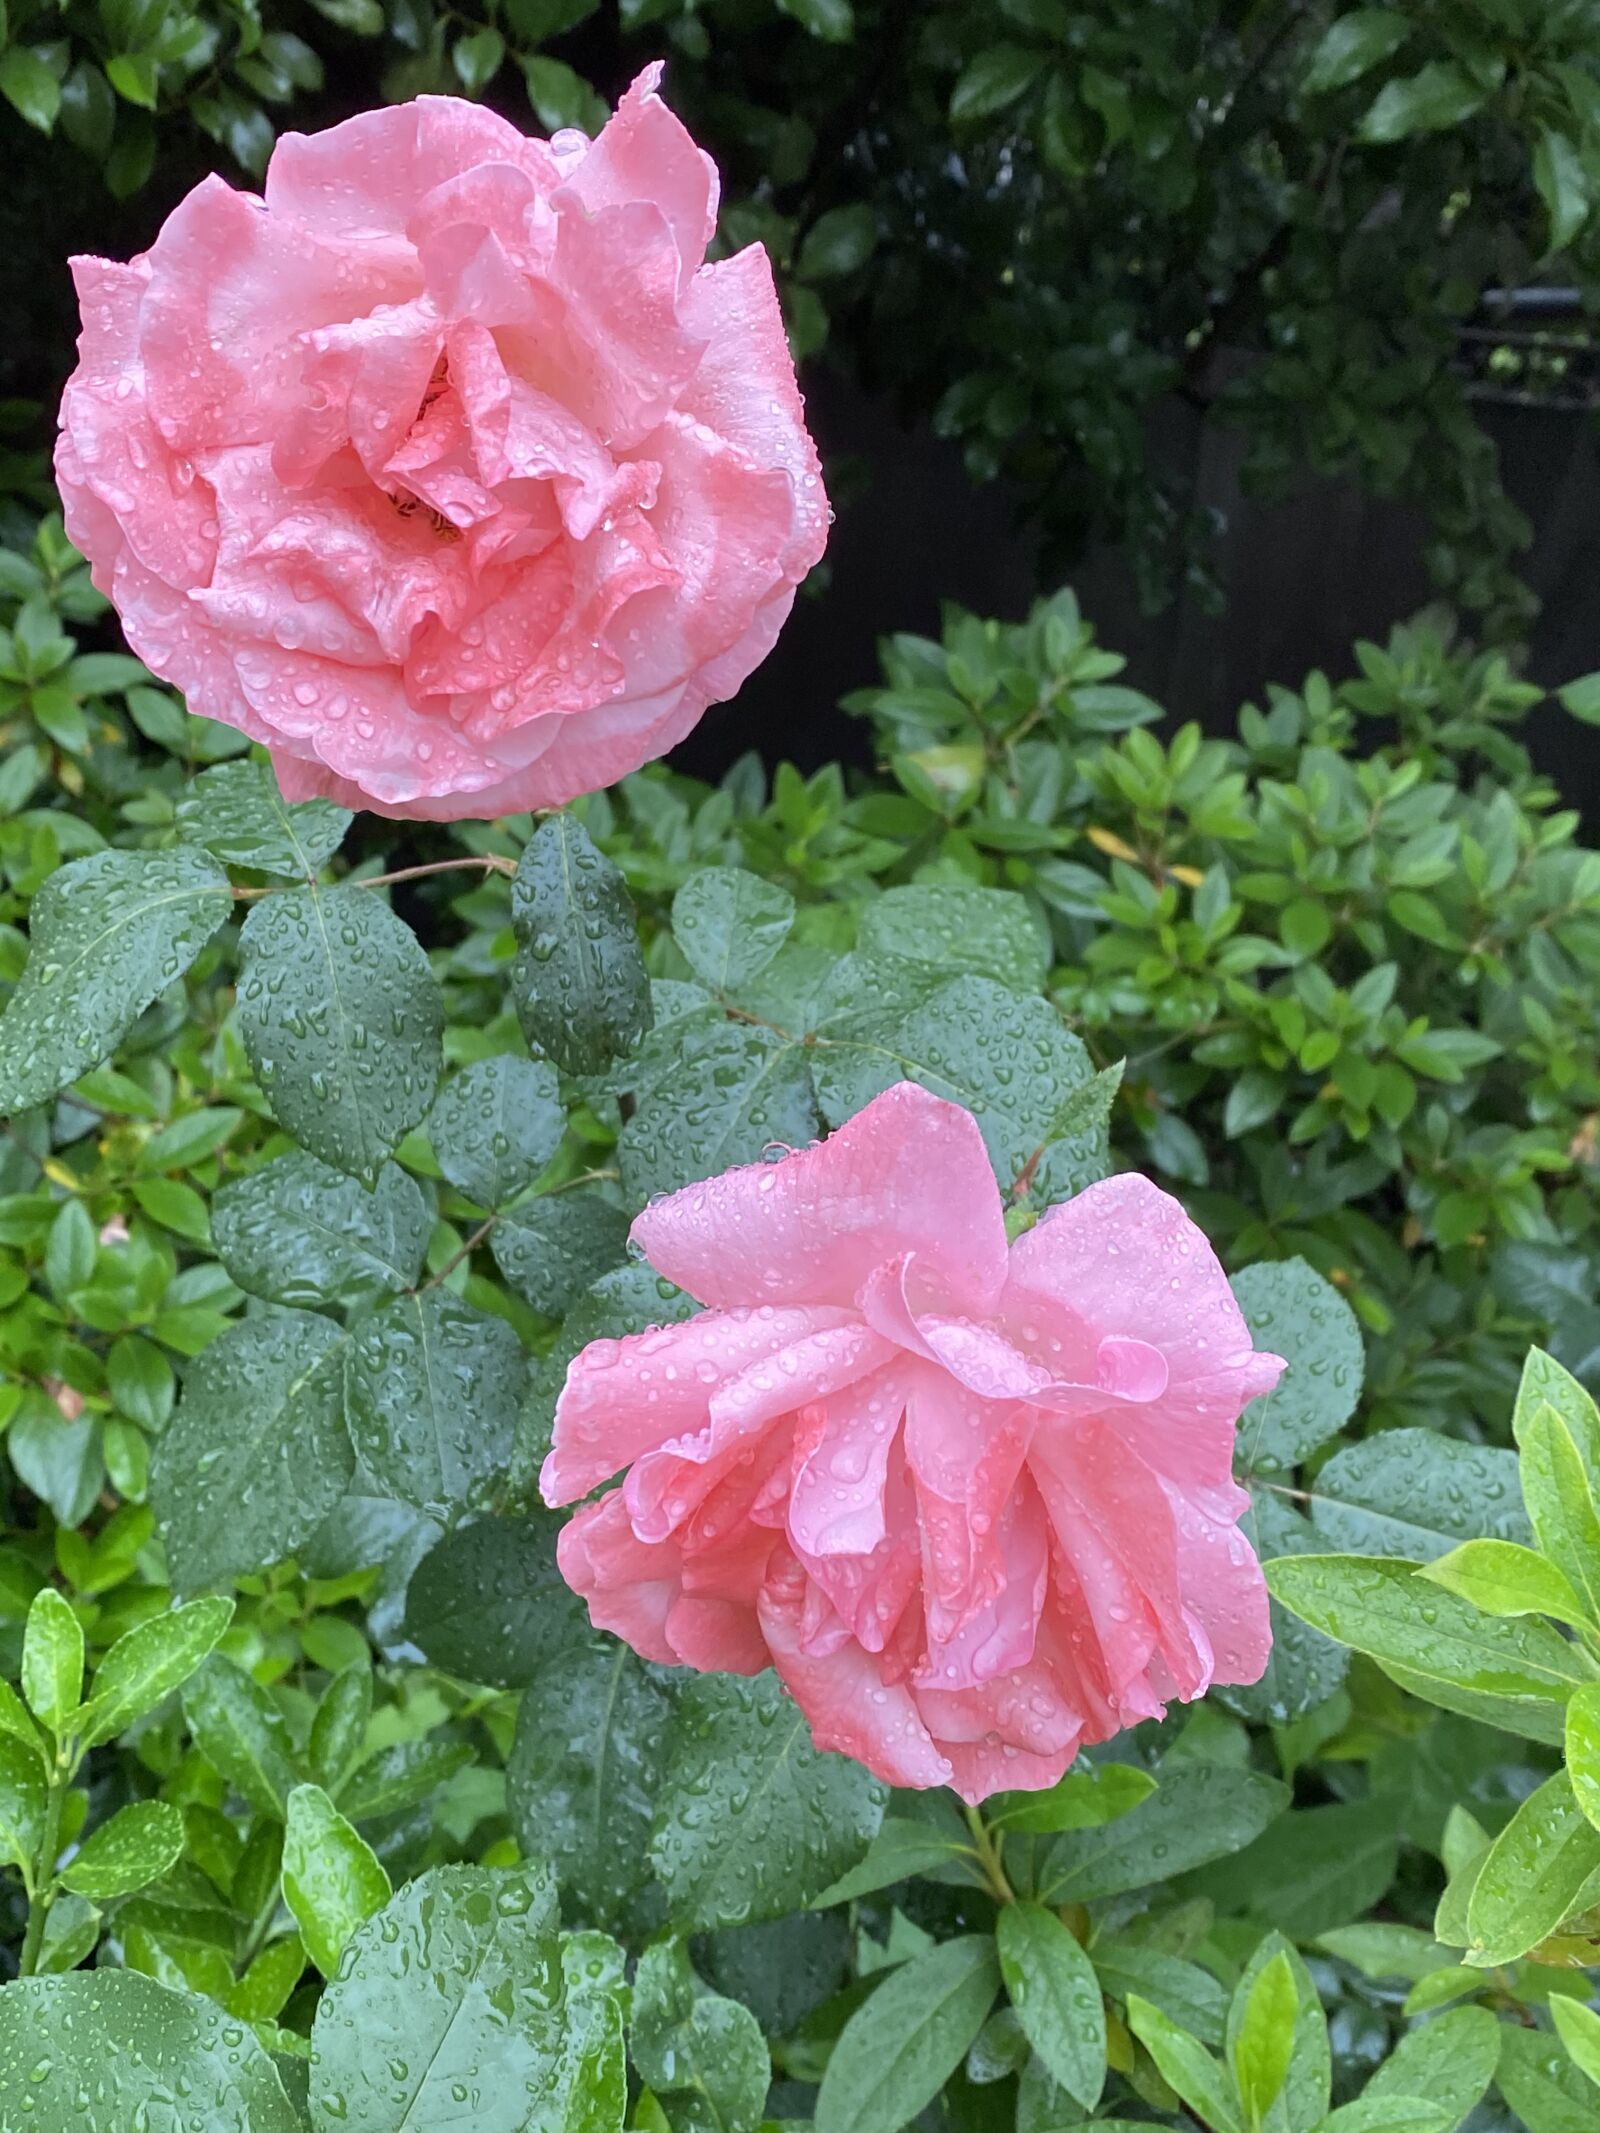 iPhone 11 back dual wide camera 4.25mm f/1.8 sample photo. Flower, beauty flower, nature photography